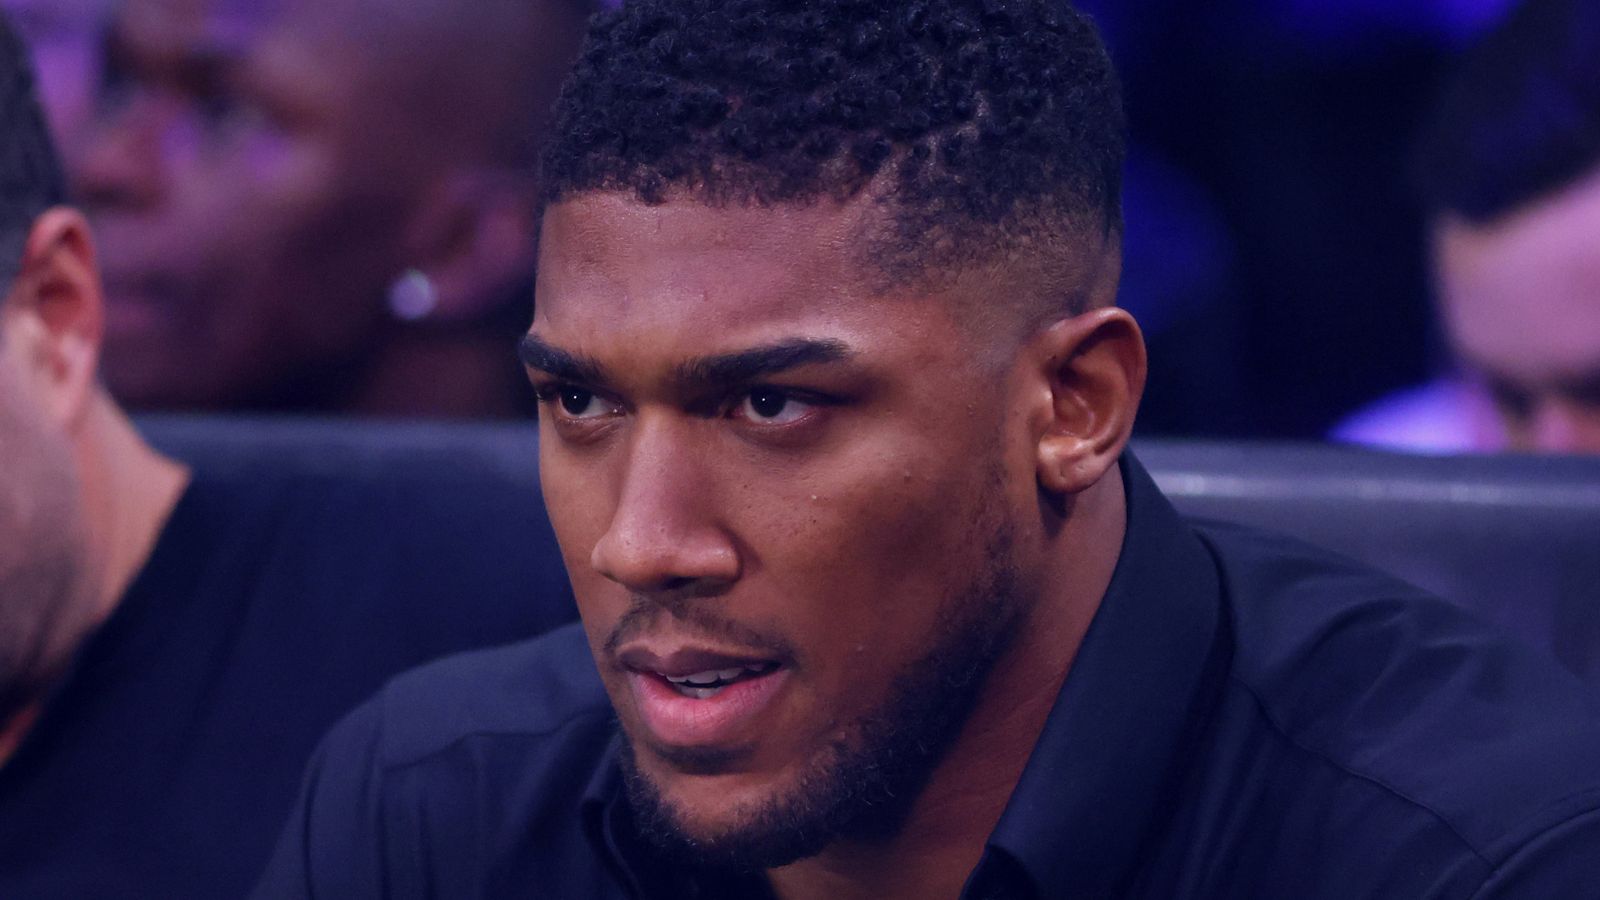 Anthony Joshua vs Oleksandr Usyk: This could be AJ’s last fight, says Johnny Nelson